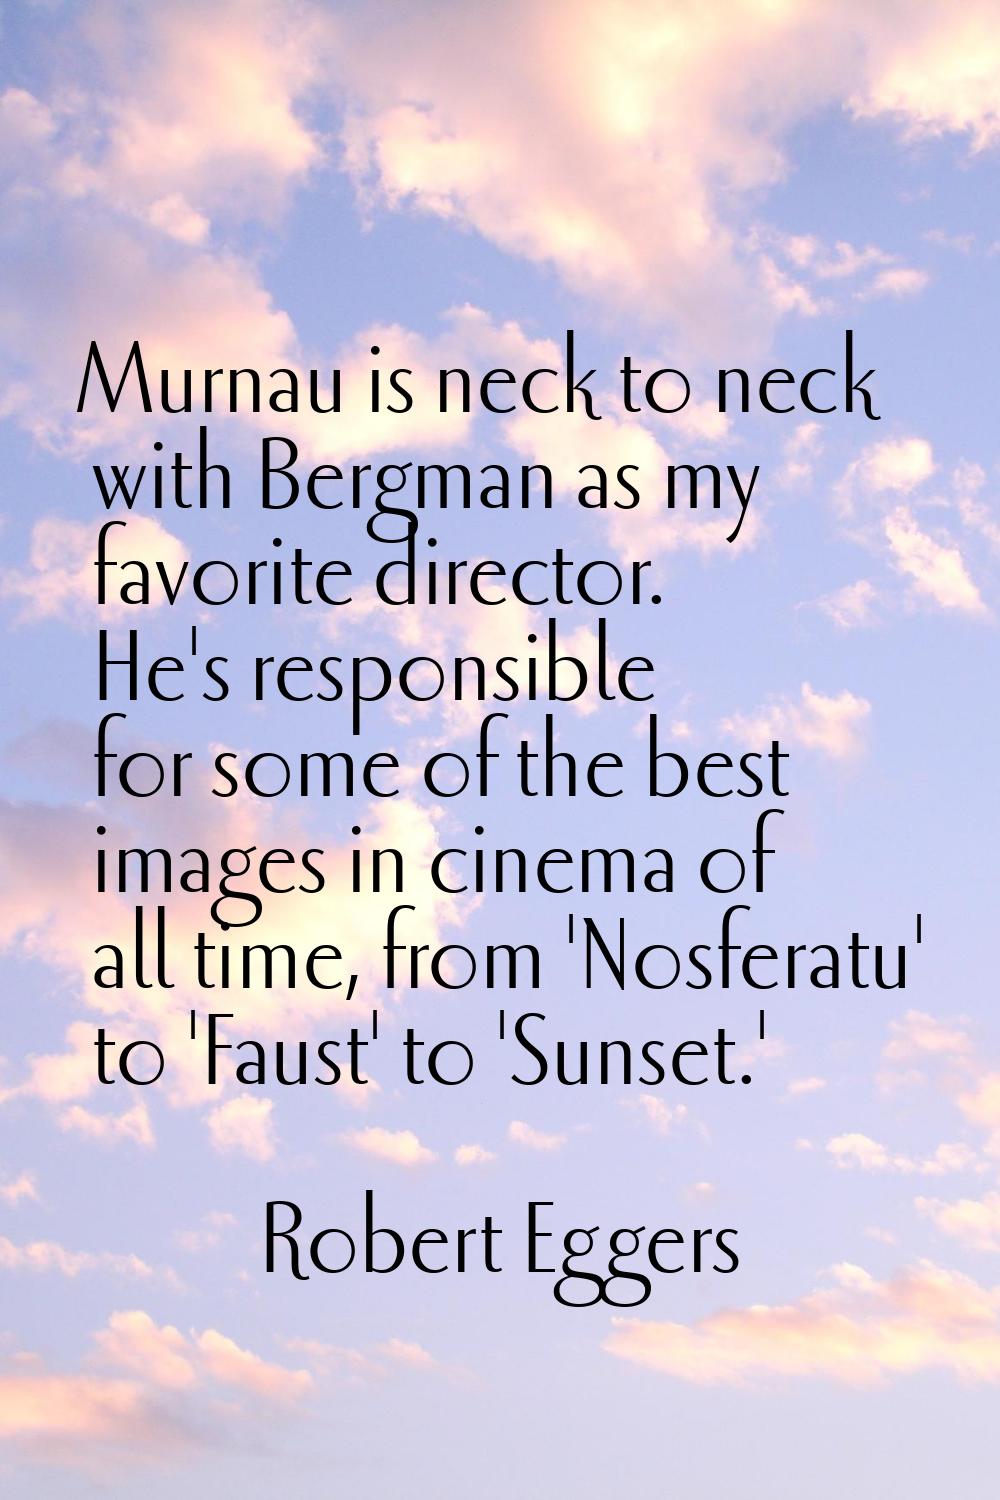 Murnau is neck to neck with Bergman as my favorite director. He's responsible for some of the best 